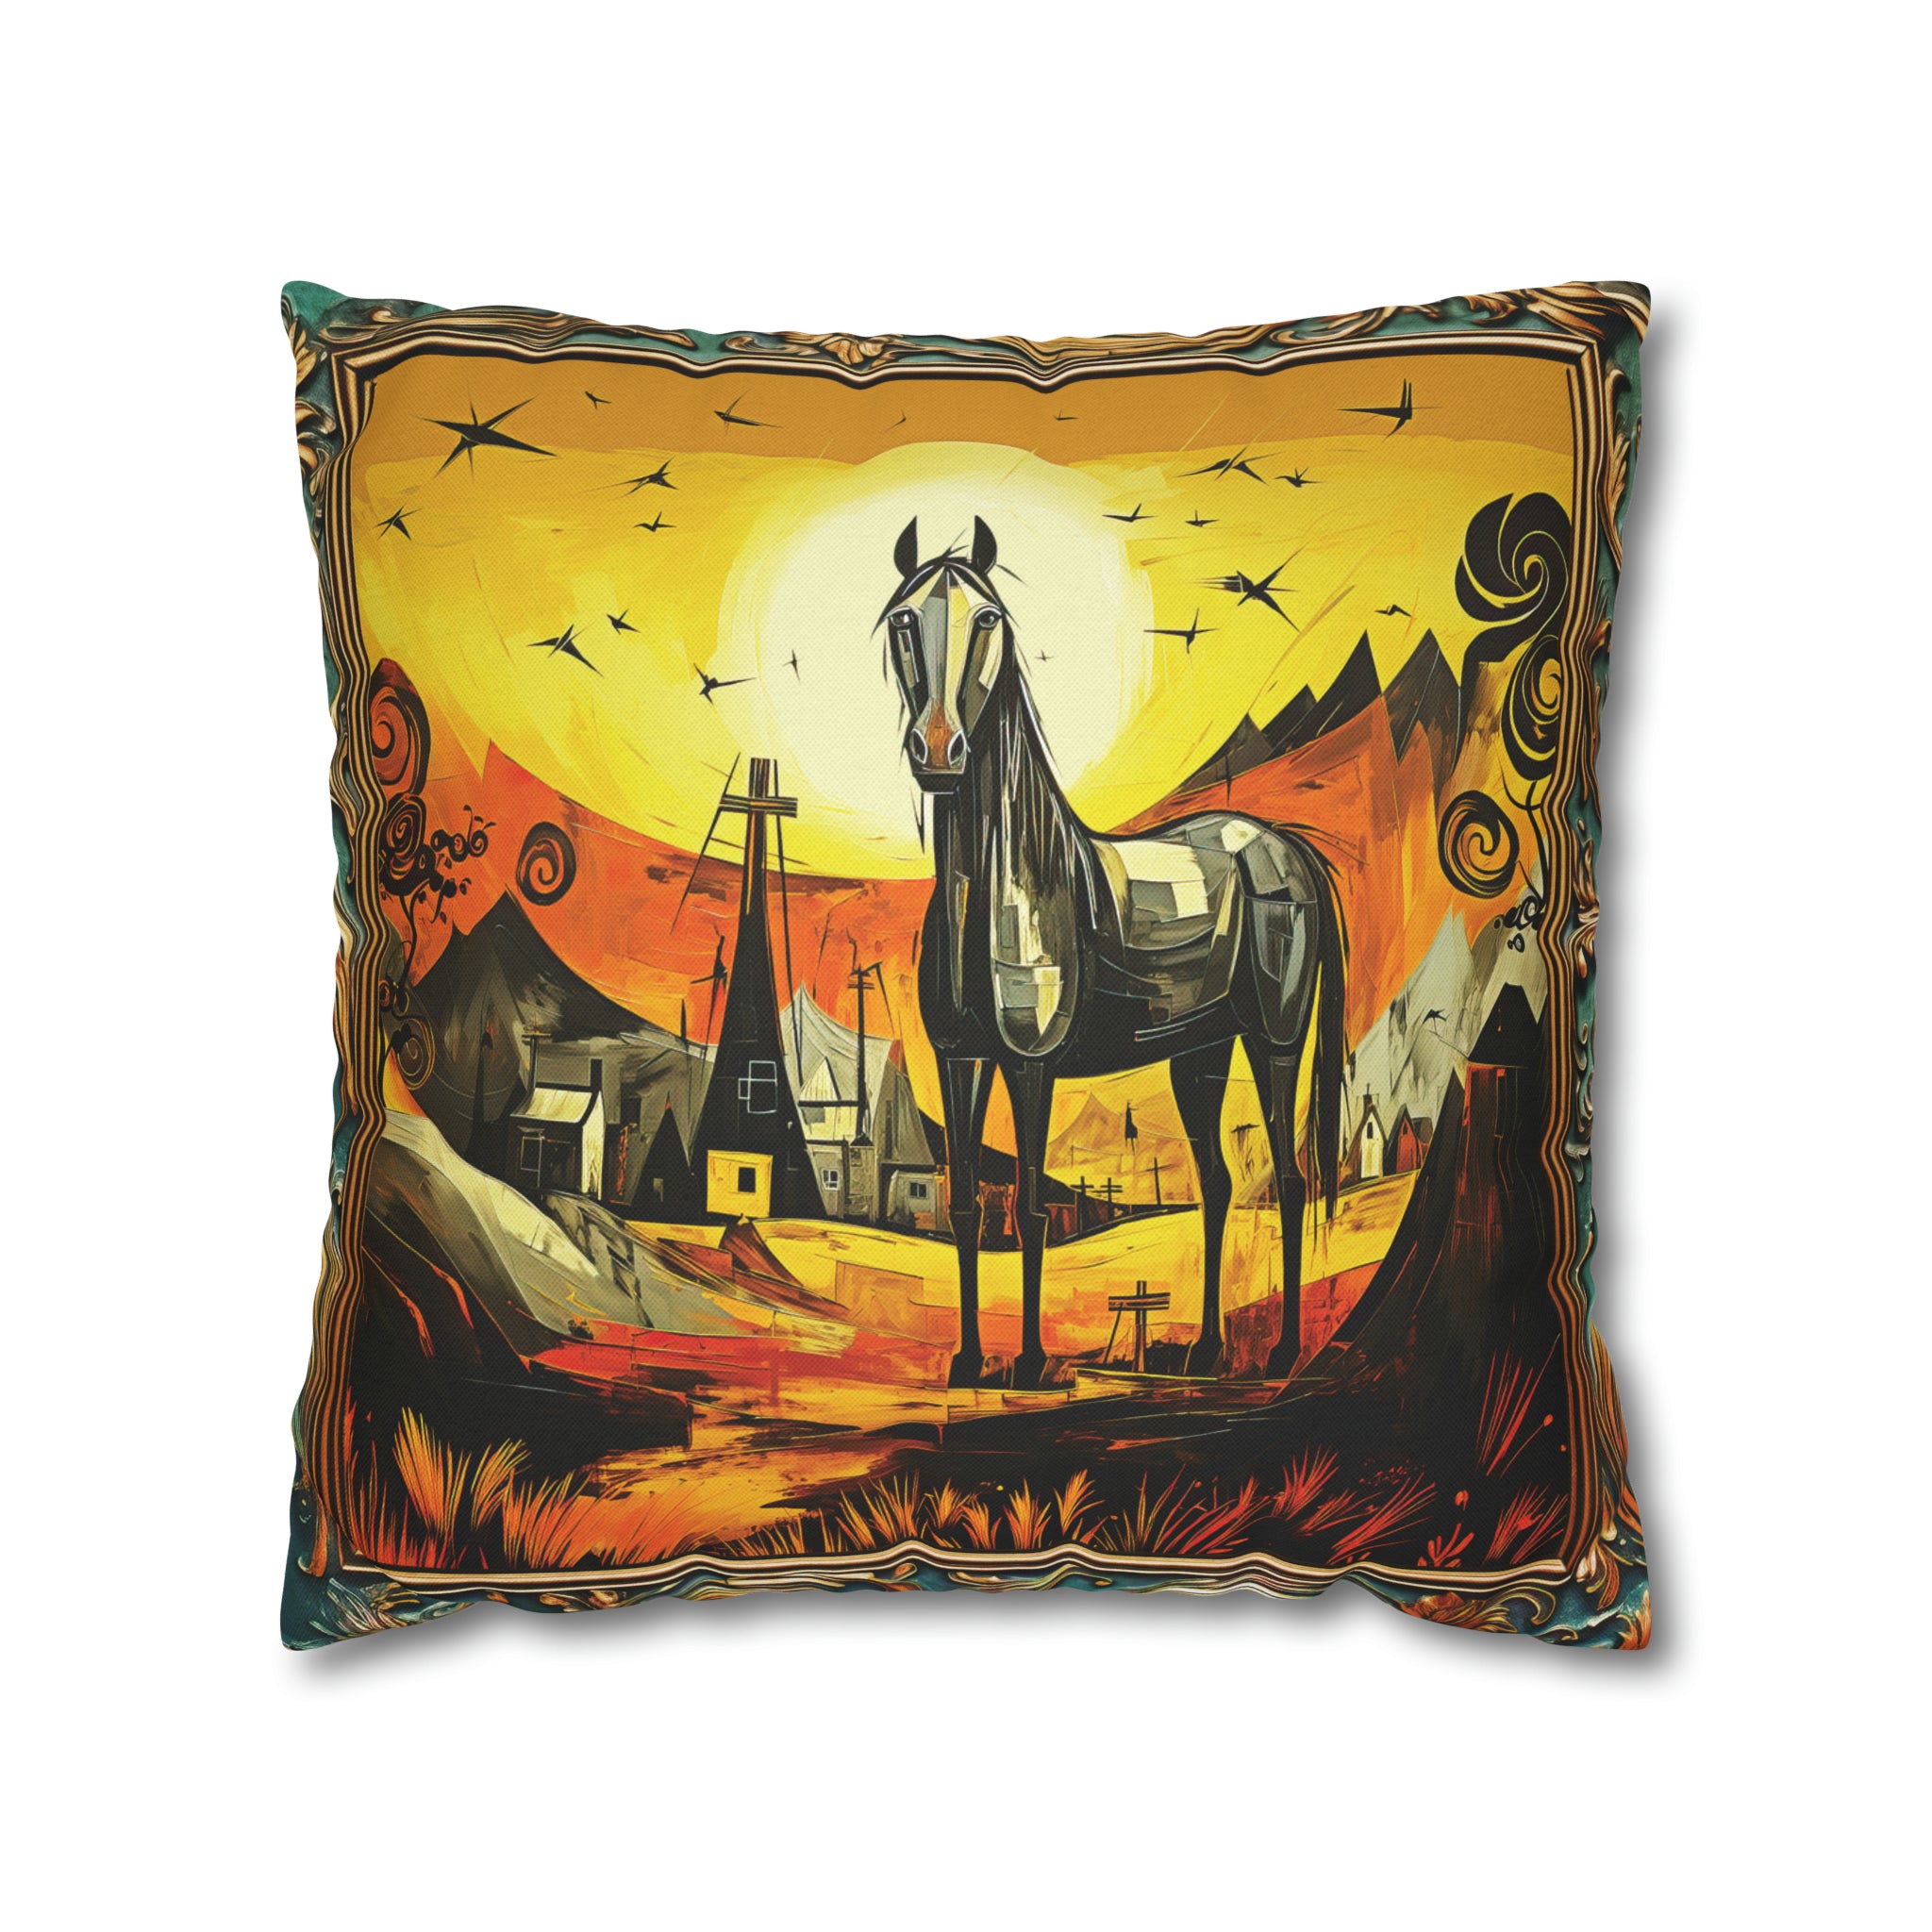 Square Pillow Case 18" x 18", CASE ONLY, no pillow form, original Art ,Colorful, Beautiful Abstract Black Horse at Sunset in a Western Village